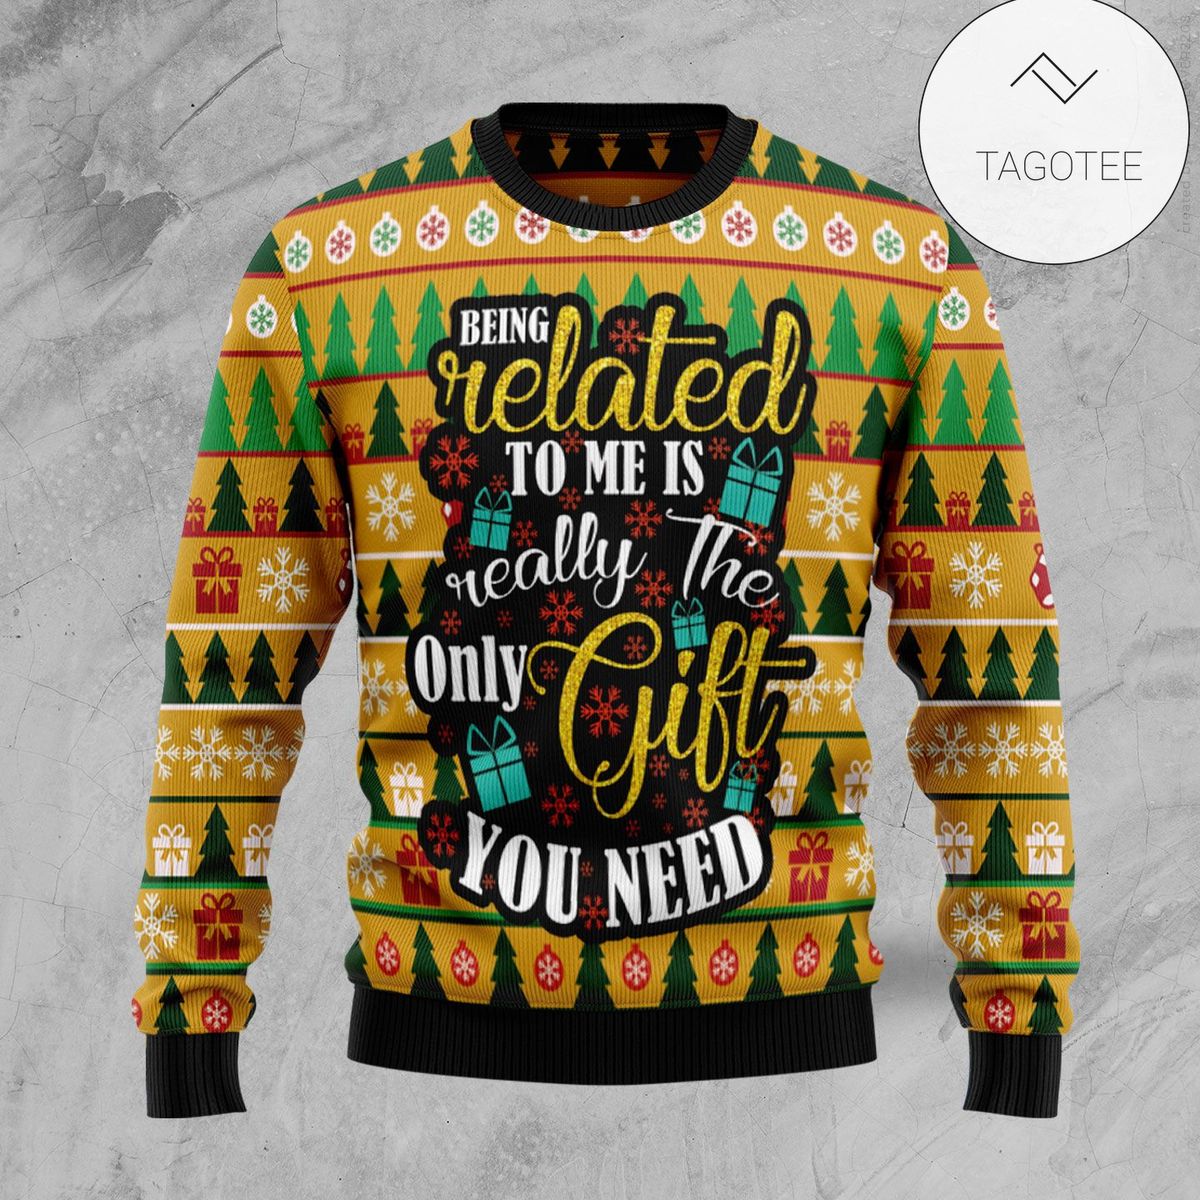 New 2021 The Only Gift You Need Ugly Christmas Sweater